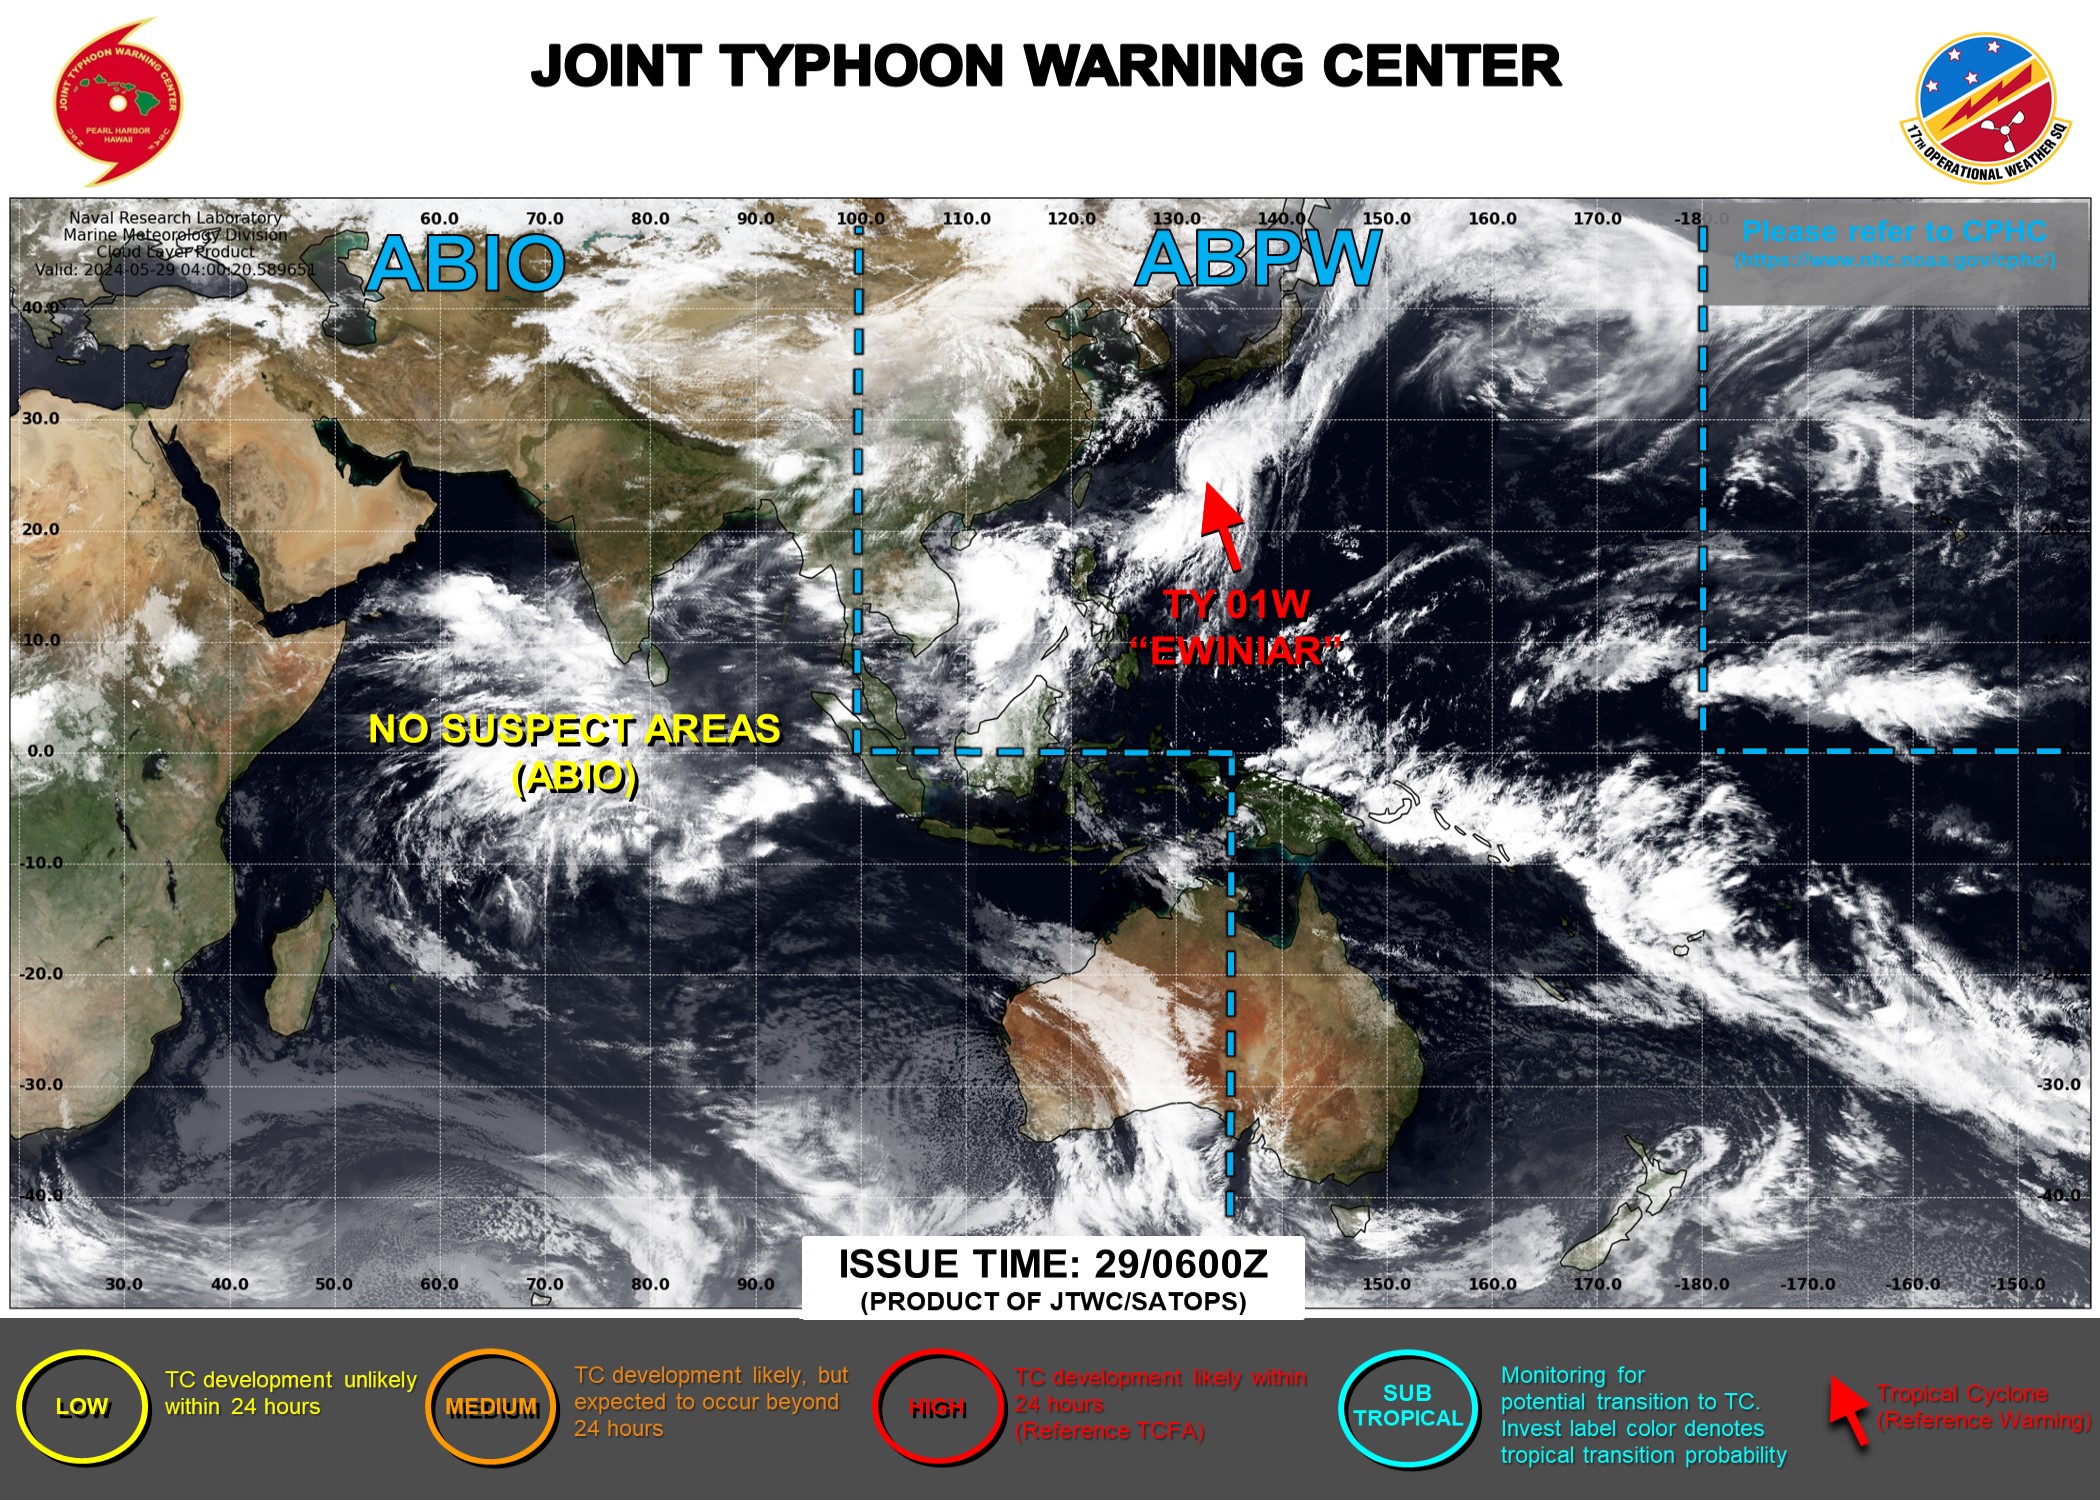 JTWC IS ISSUING 6HOURLY WARNINGS AND 3HOURLY SATELLITE BULLETINS ON 01W.